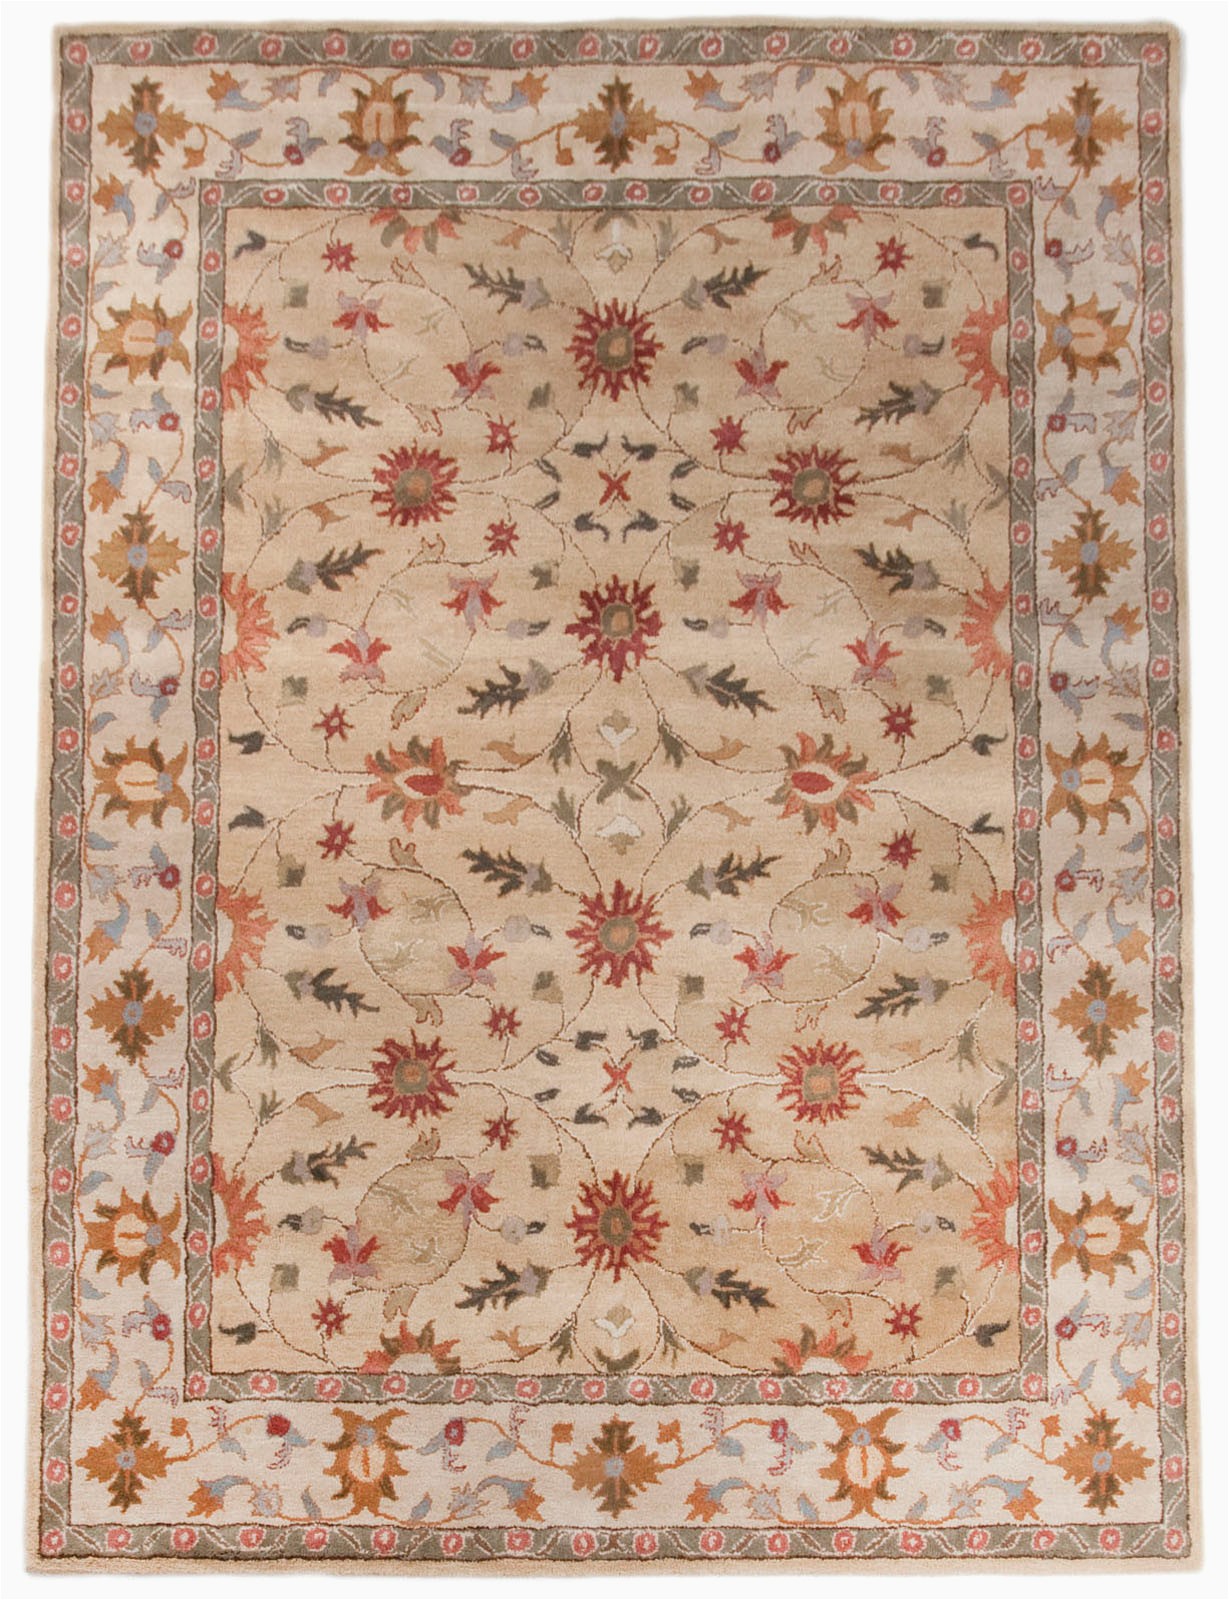 lowes rugs 8x10 8x10 area rugs 9x12 seagrass rug costco area rugs home depot area rugs 5x7 8x10 shag area rug kohls rugs 8x10 area rugs home depot 10x12 area rugs area rugs 8x10 pink area